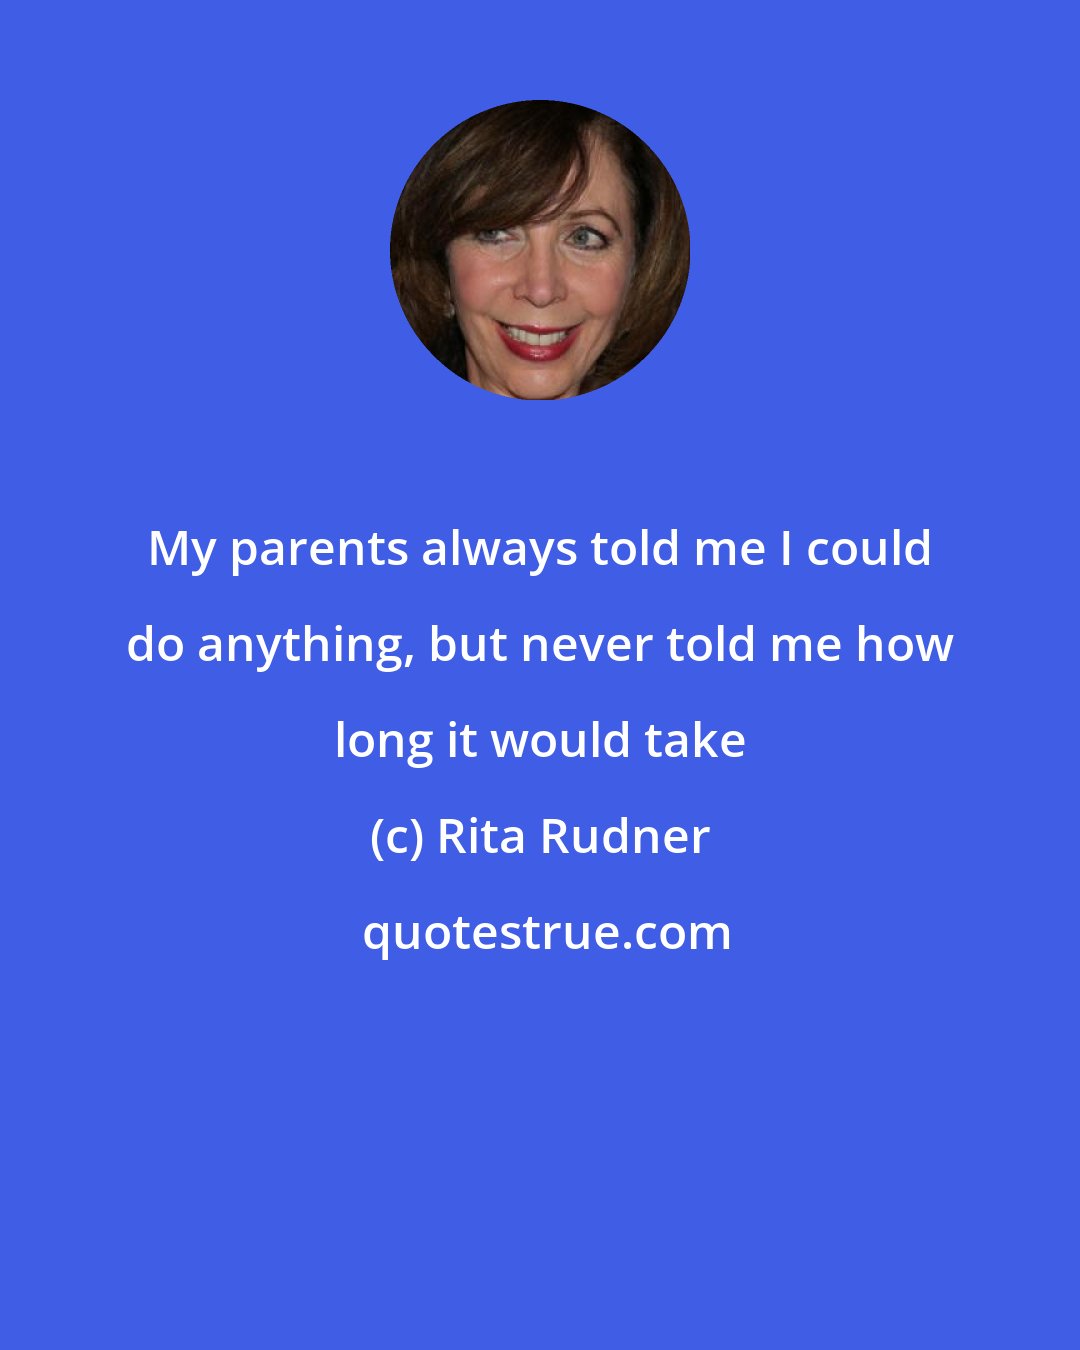 Rita Rudner: My parents always told me I could do anything, but never told me how long it would take